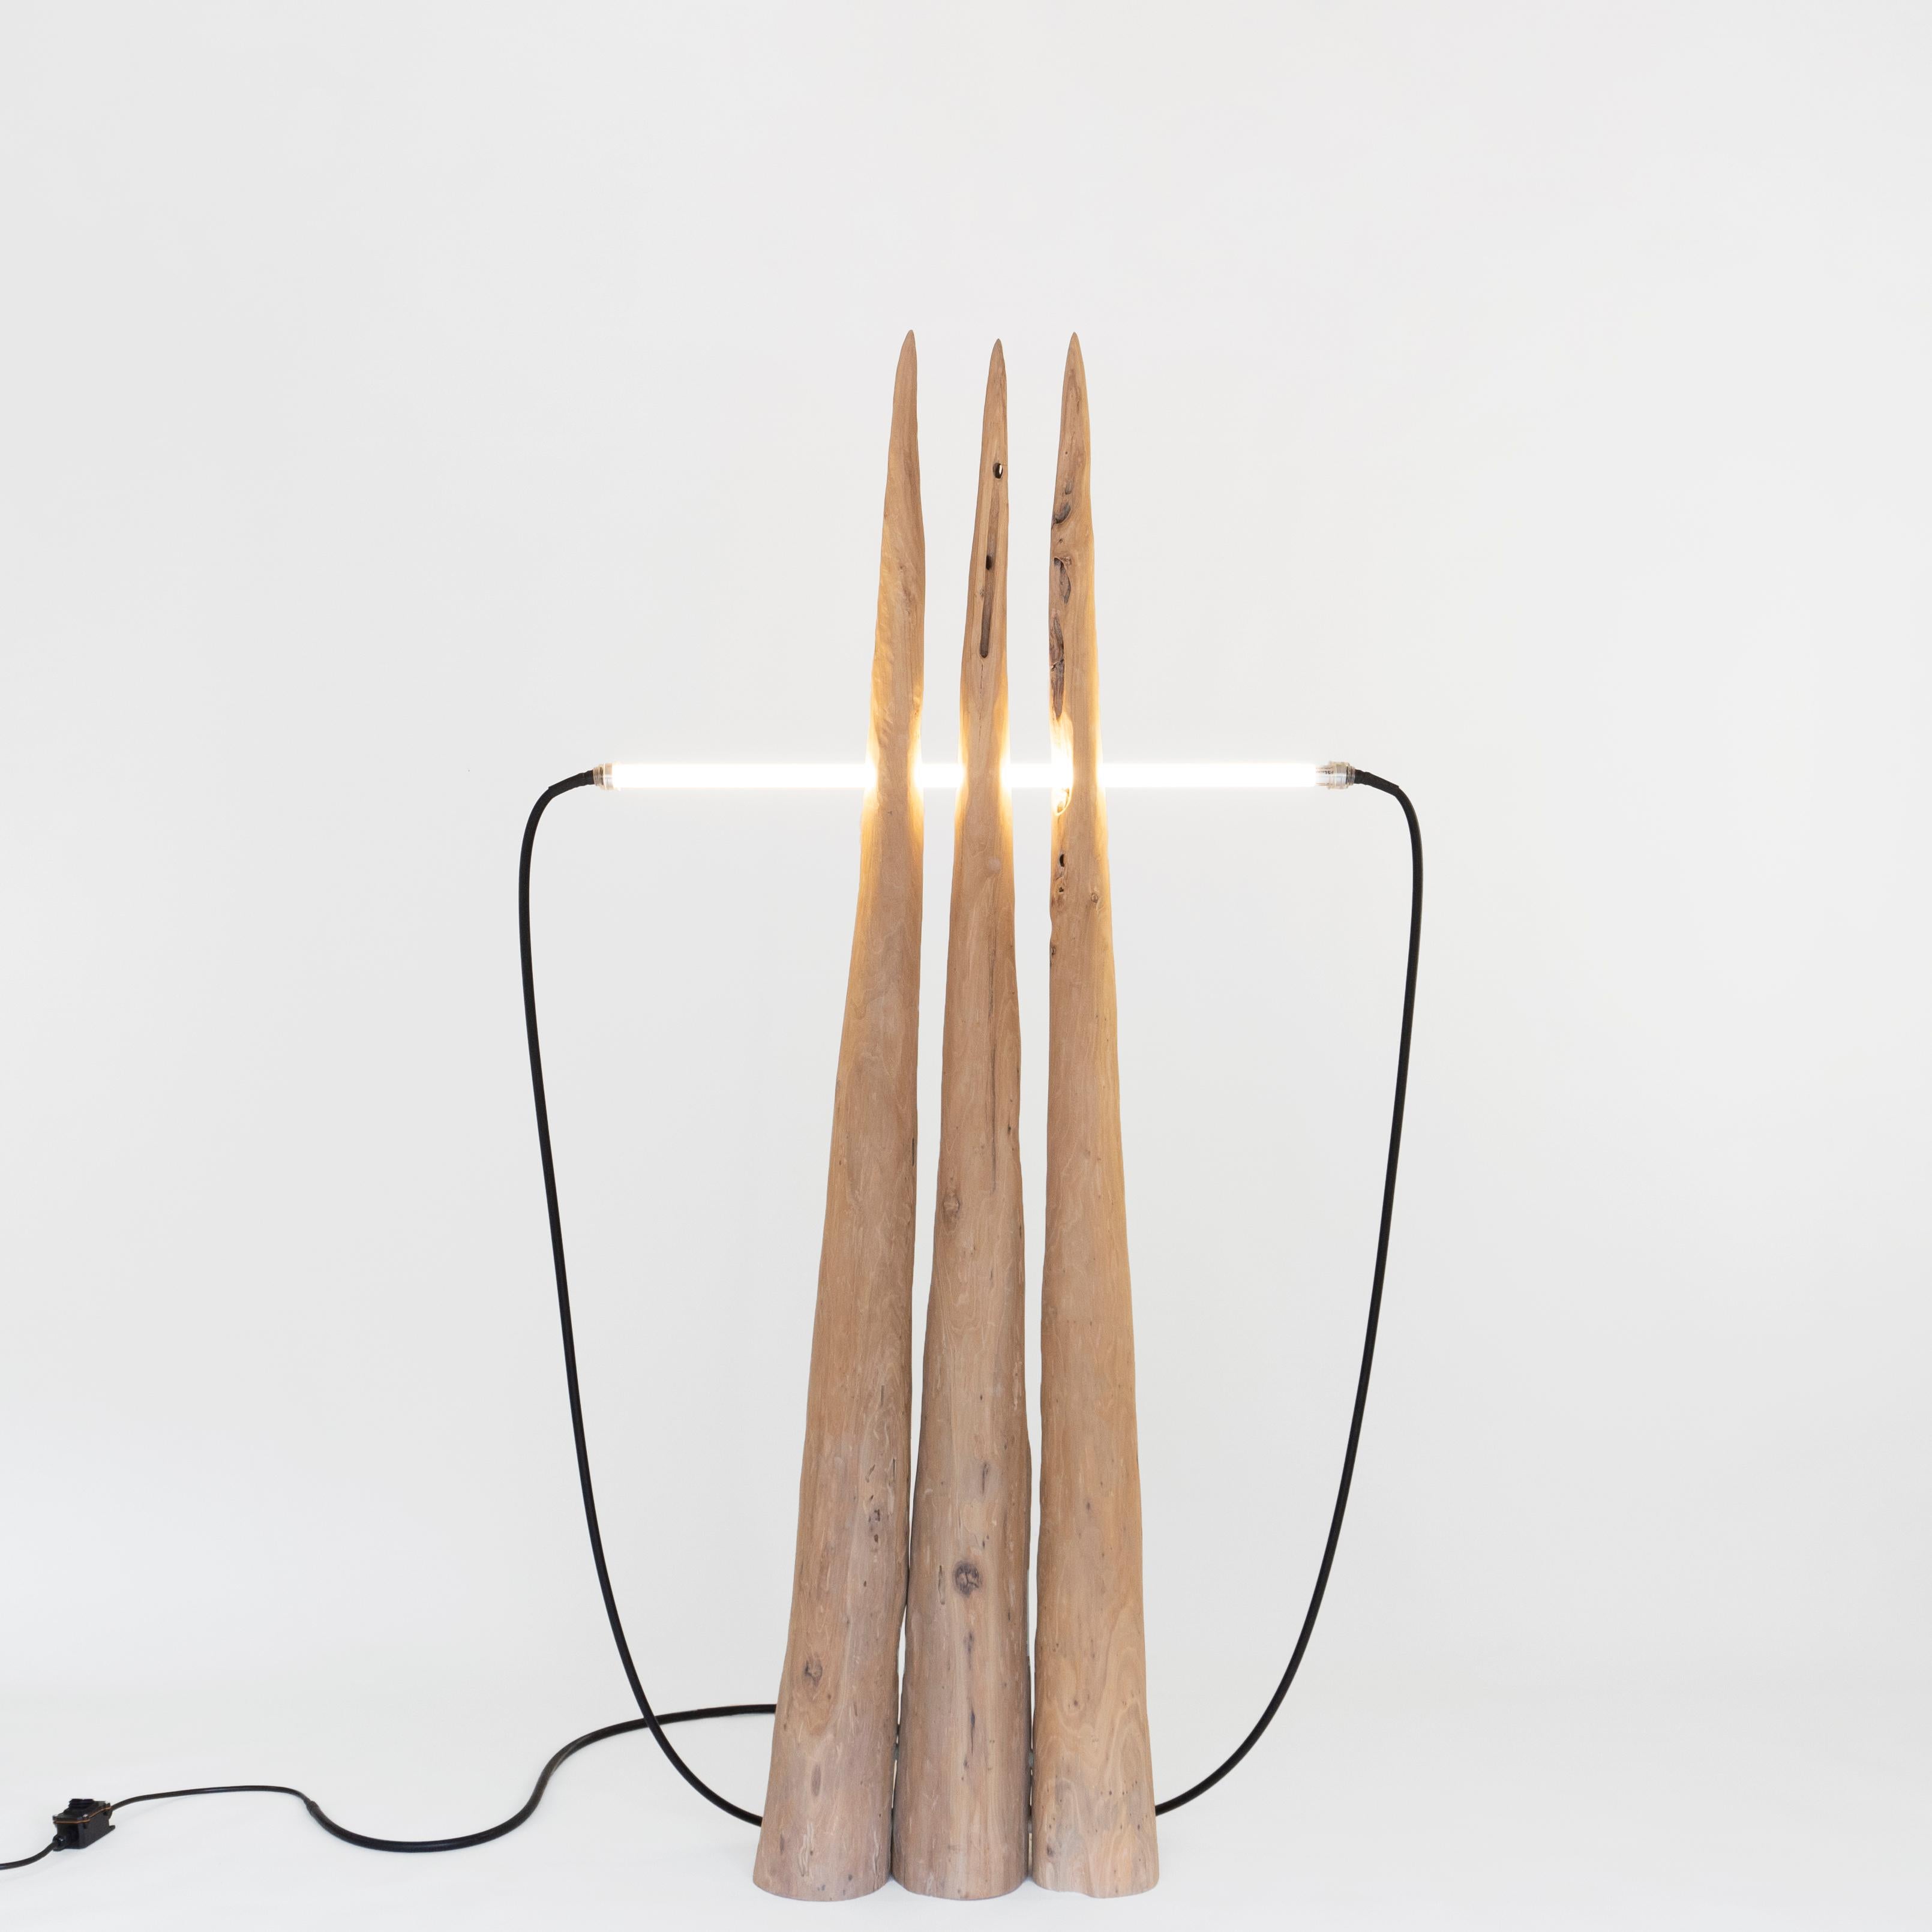 Three Spike Light by Henry D'ath
Dimensions: D 110 x W 20 x H 190 cm
Materials: Wood.
The piece is available in natural, cream lacquer, or black calligraphy ink finish.

Piece is handmade by artist.

Made of three columns of wood from historical